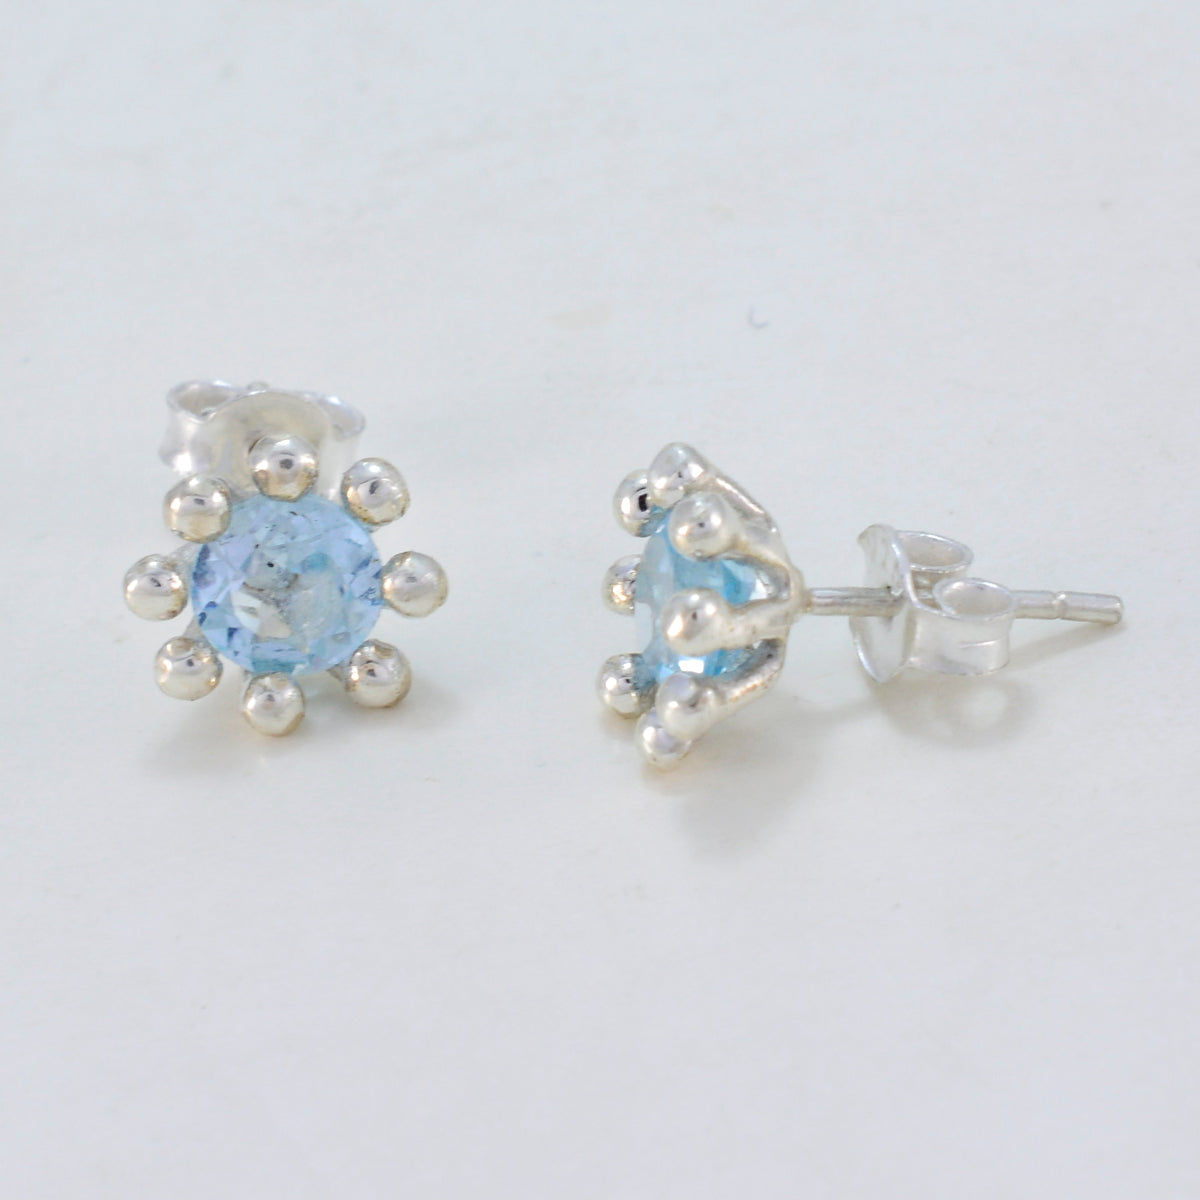 Riyo Real Gemstones round Faceted Blue Topaz Silver Earring gift for wife